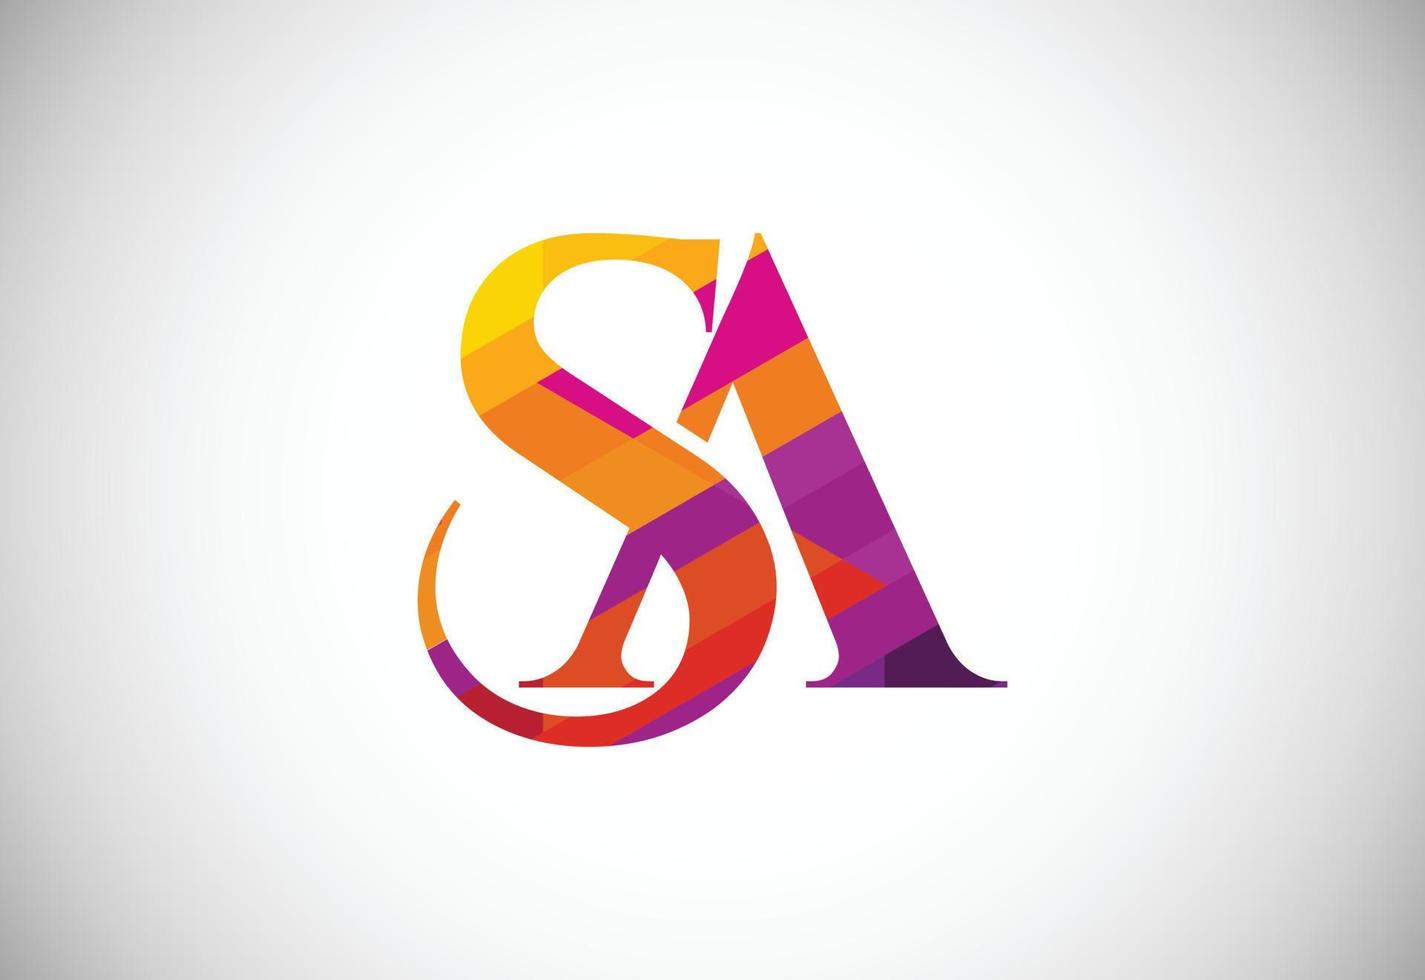 Initial Letter S A Low Poly Logo Design Vector Template. Graphic Alphabet Symbol For Corporate Business Identity